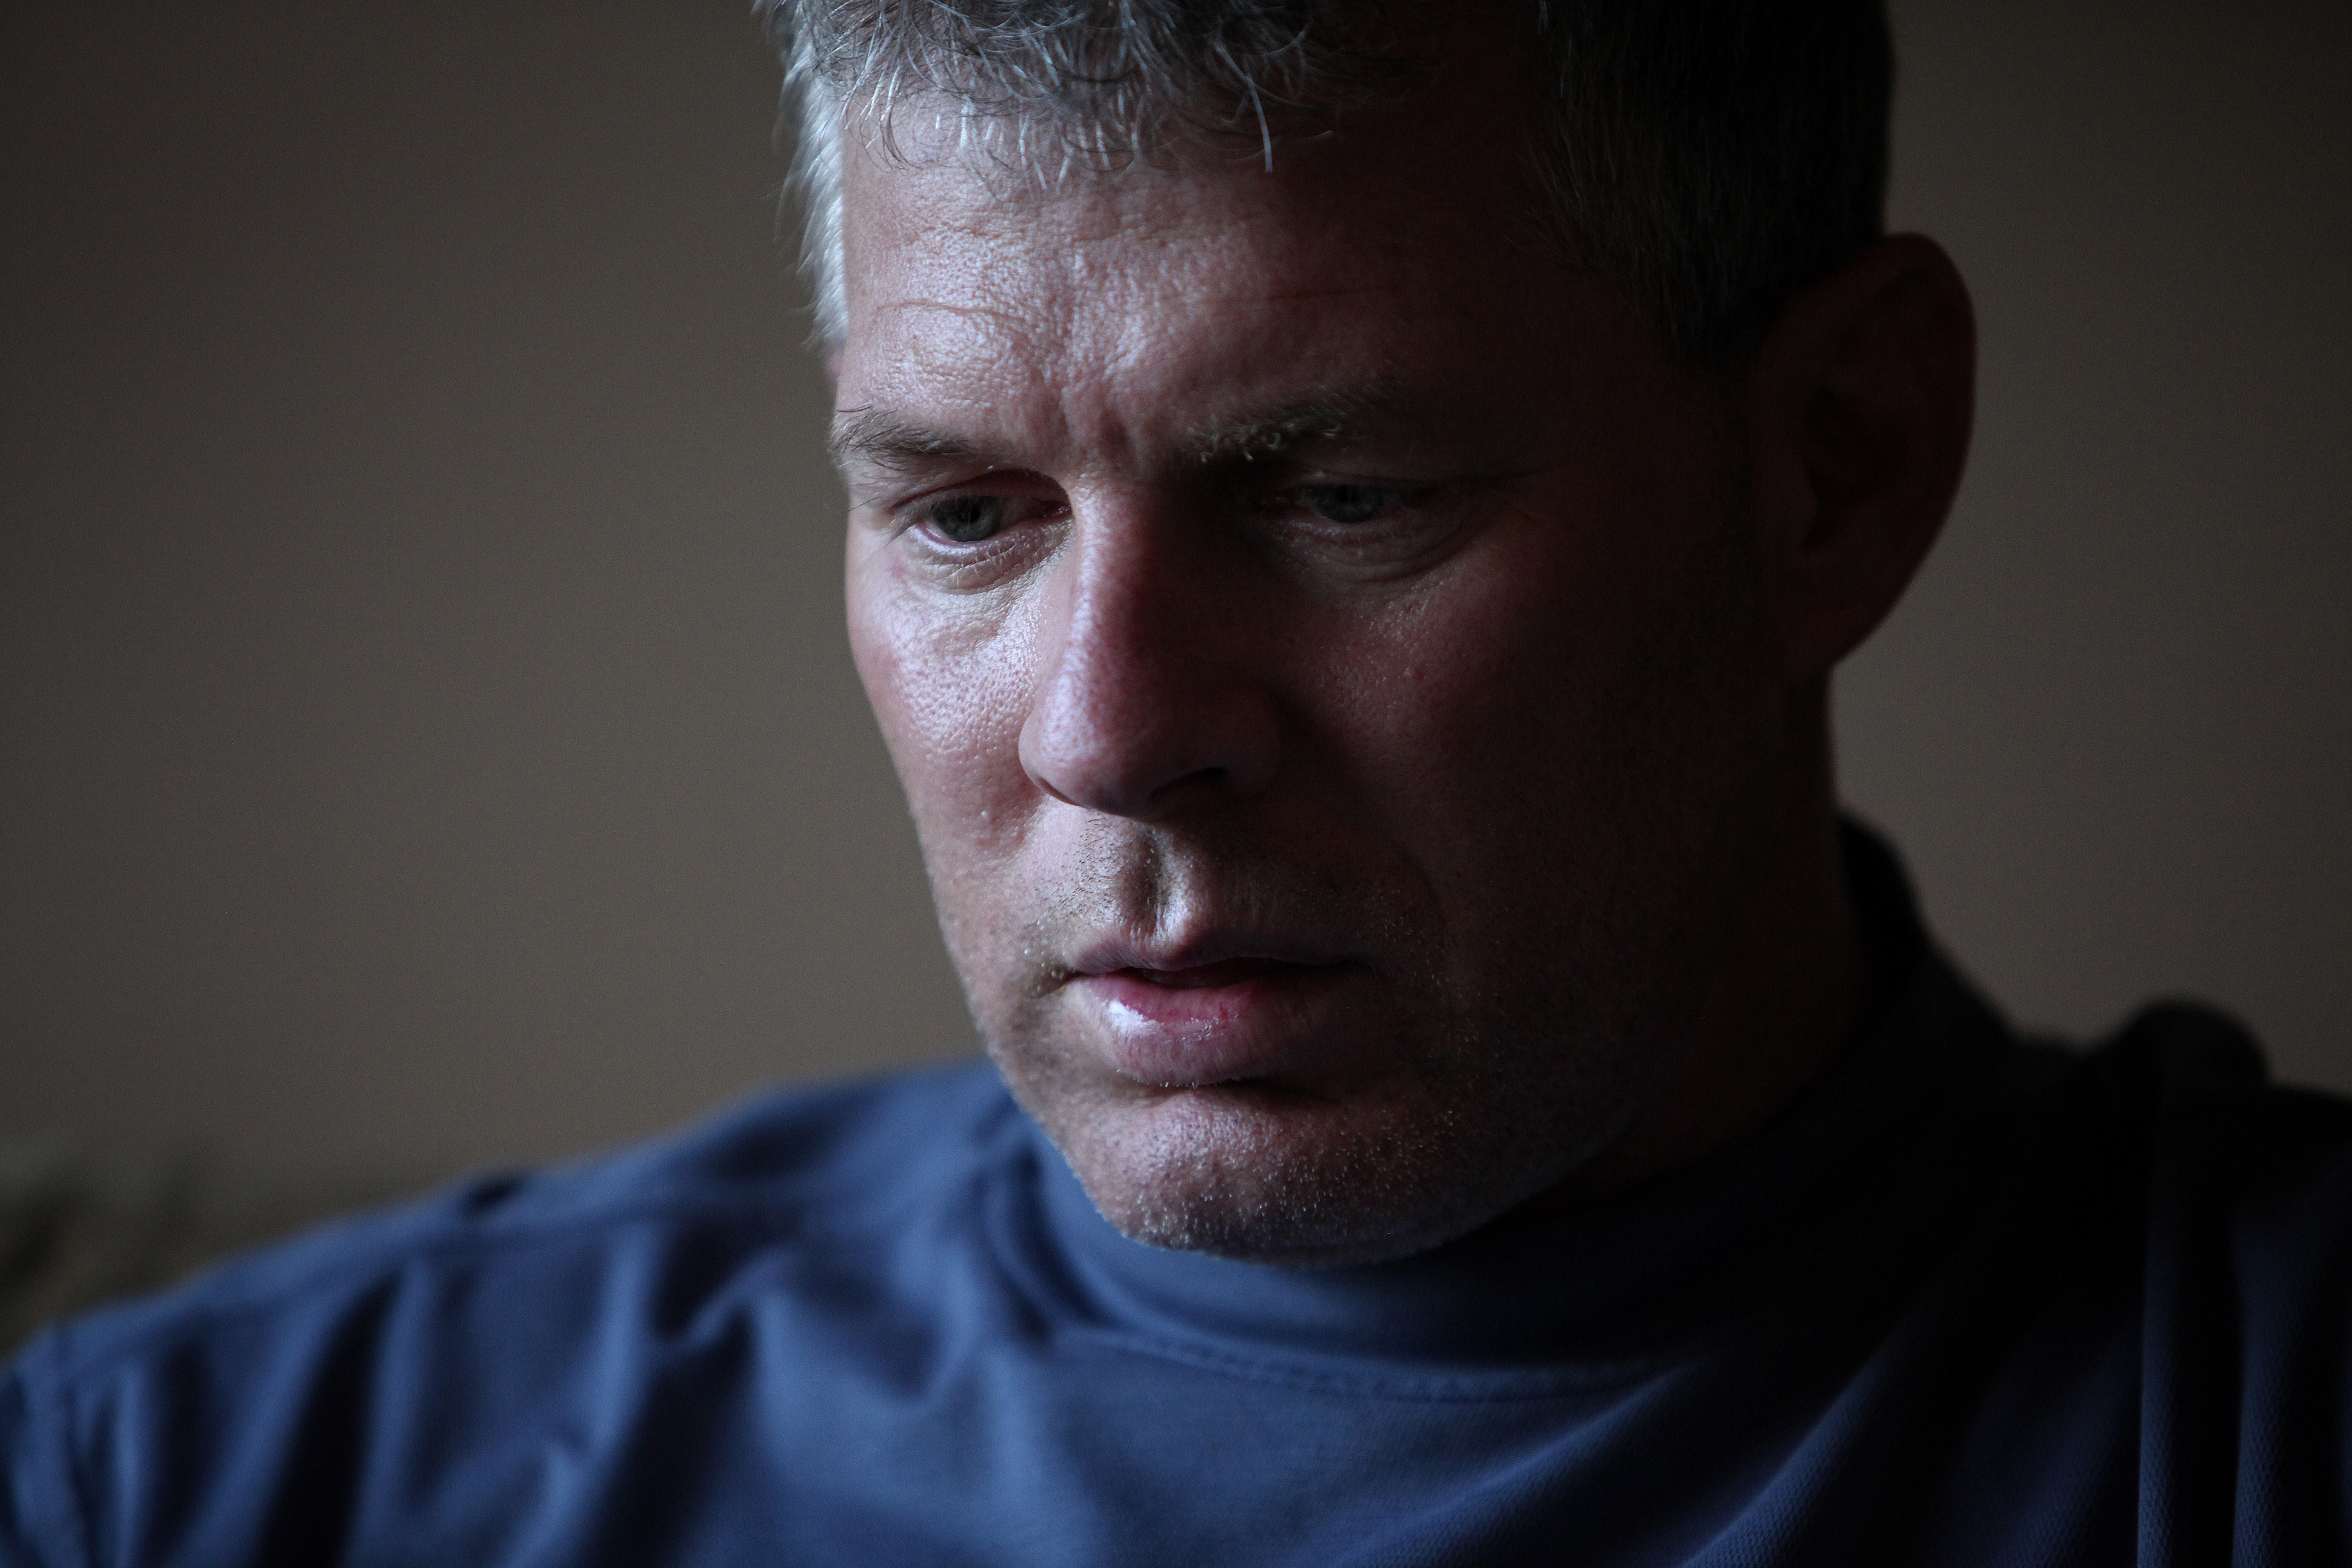 MLB Star Lenny Dykstra Is Nearly Unrecognizable After Prison Time and Multiple Drug Overdoses